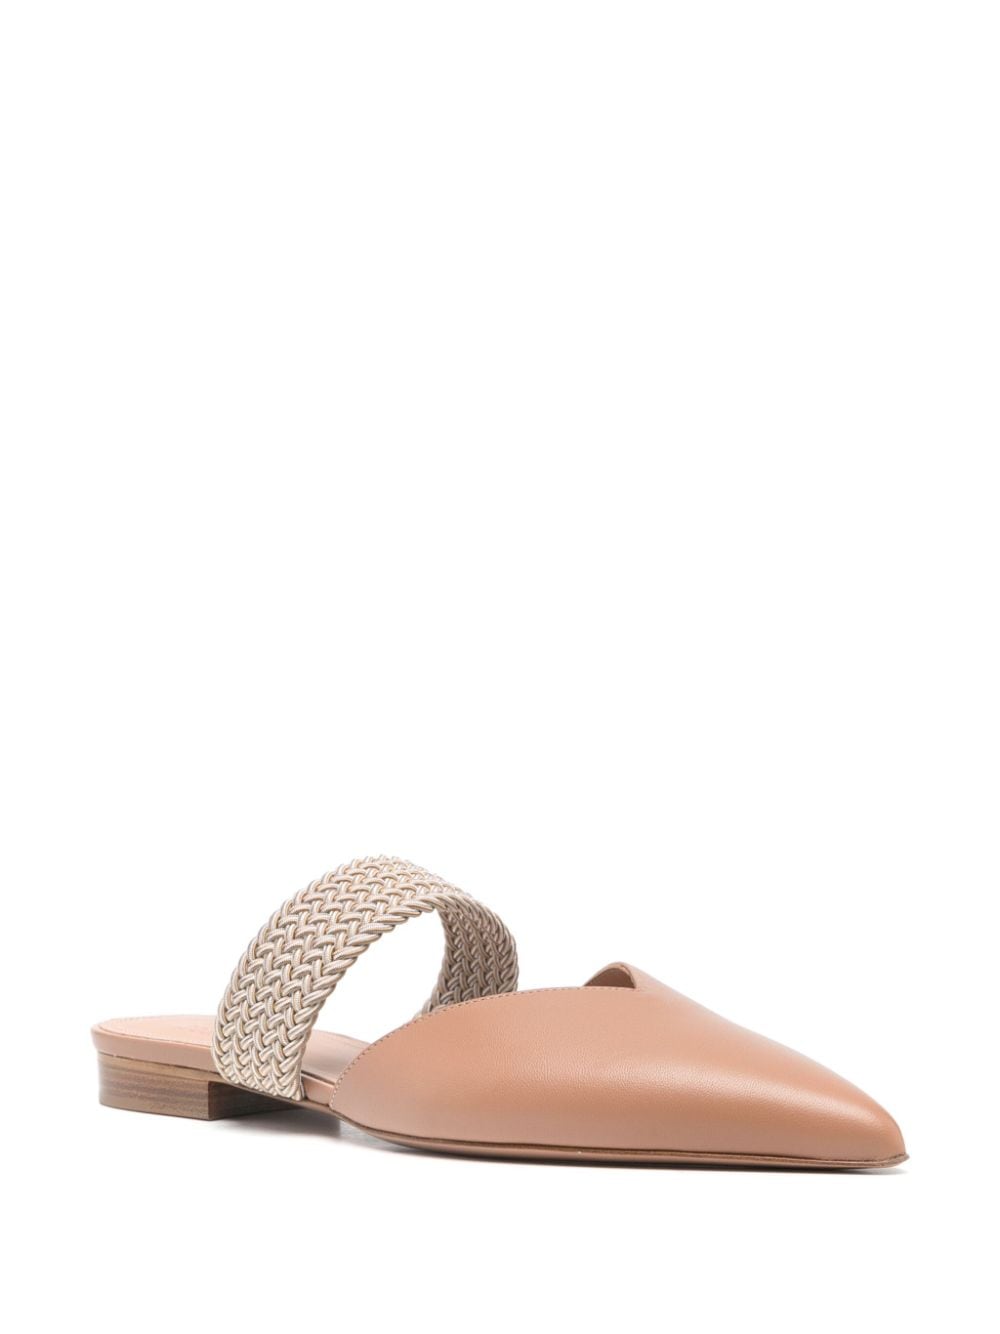 Malone Souliers Maisie leather mules - Beige